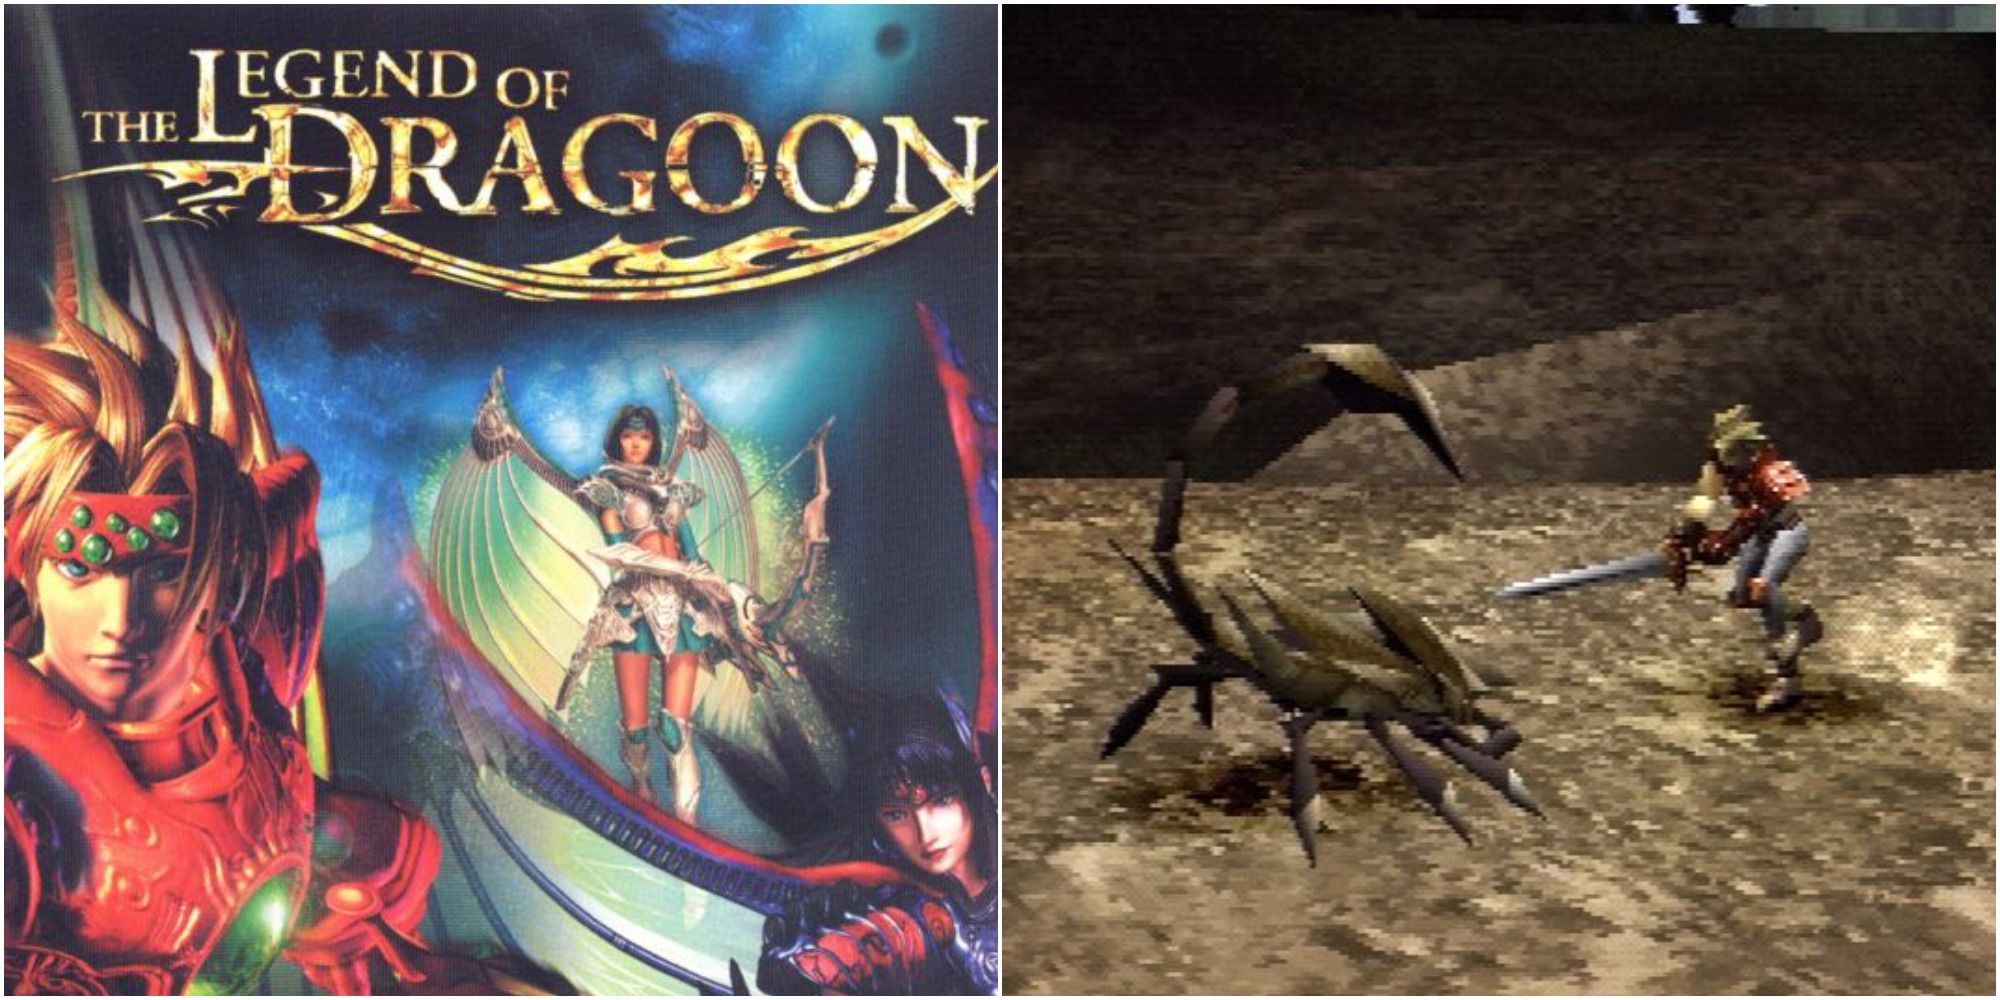 legend of dragoon cover and gameplay